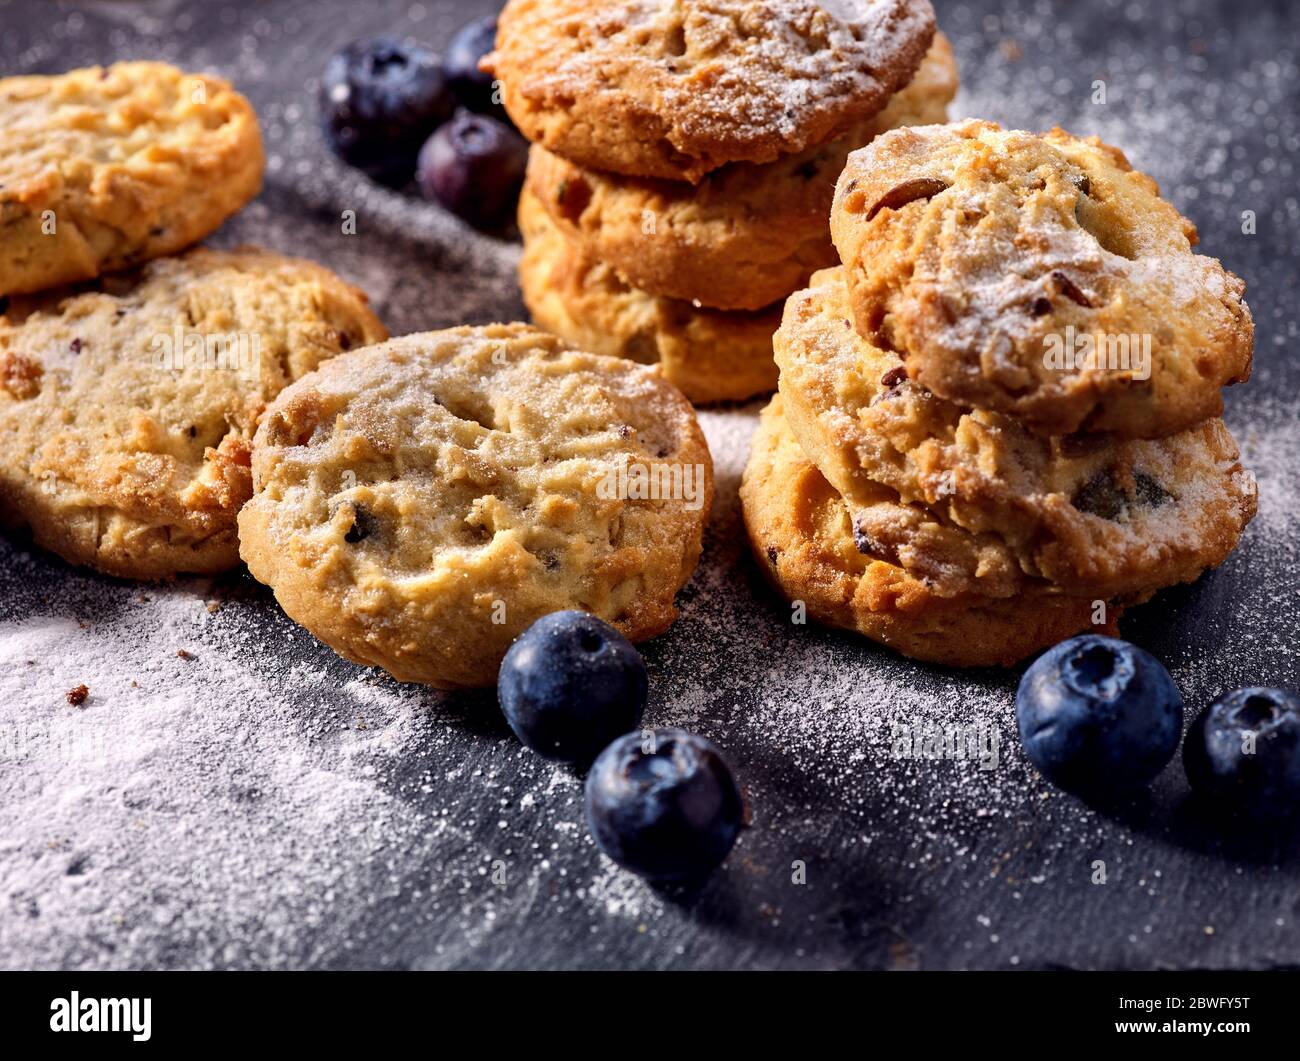 Chocolate chip cookies tied with string on shop window display Stock Photo